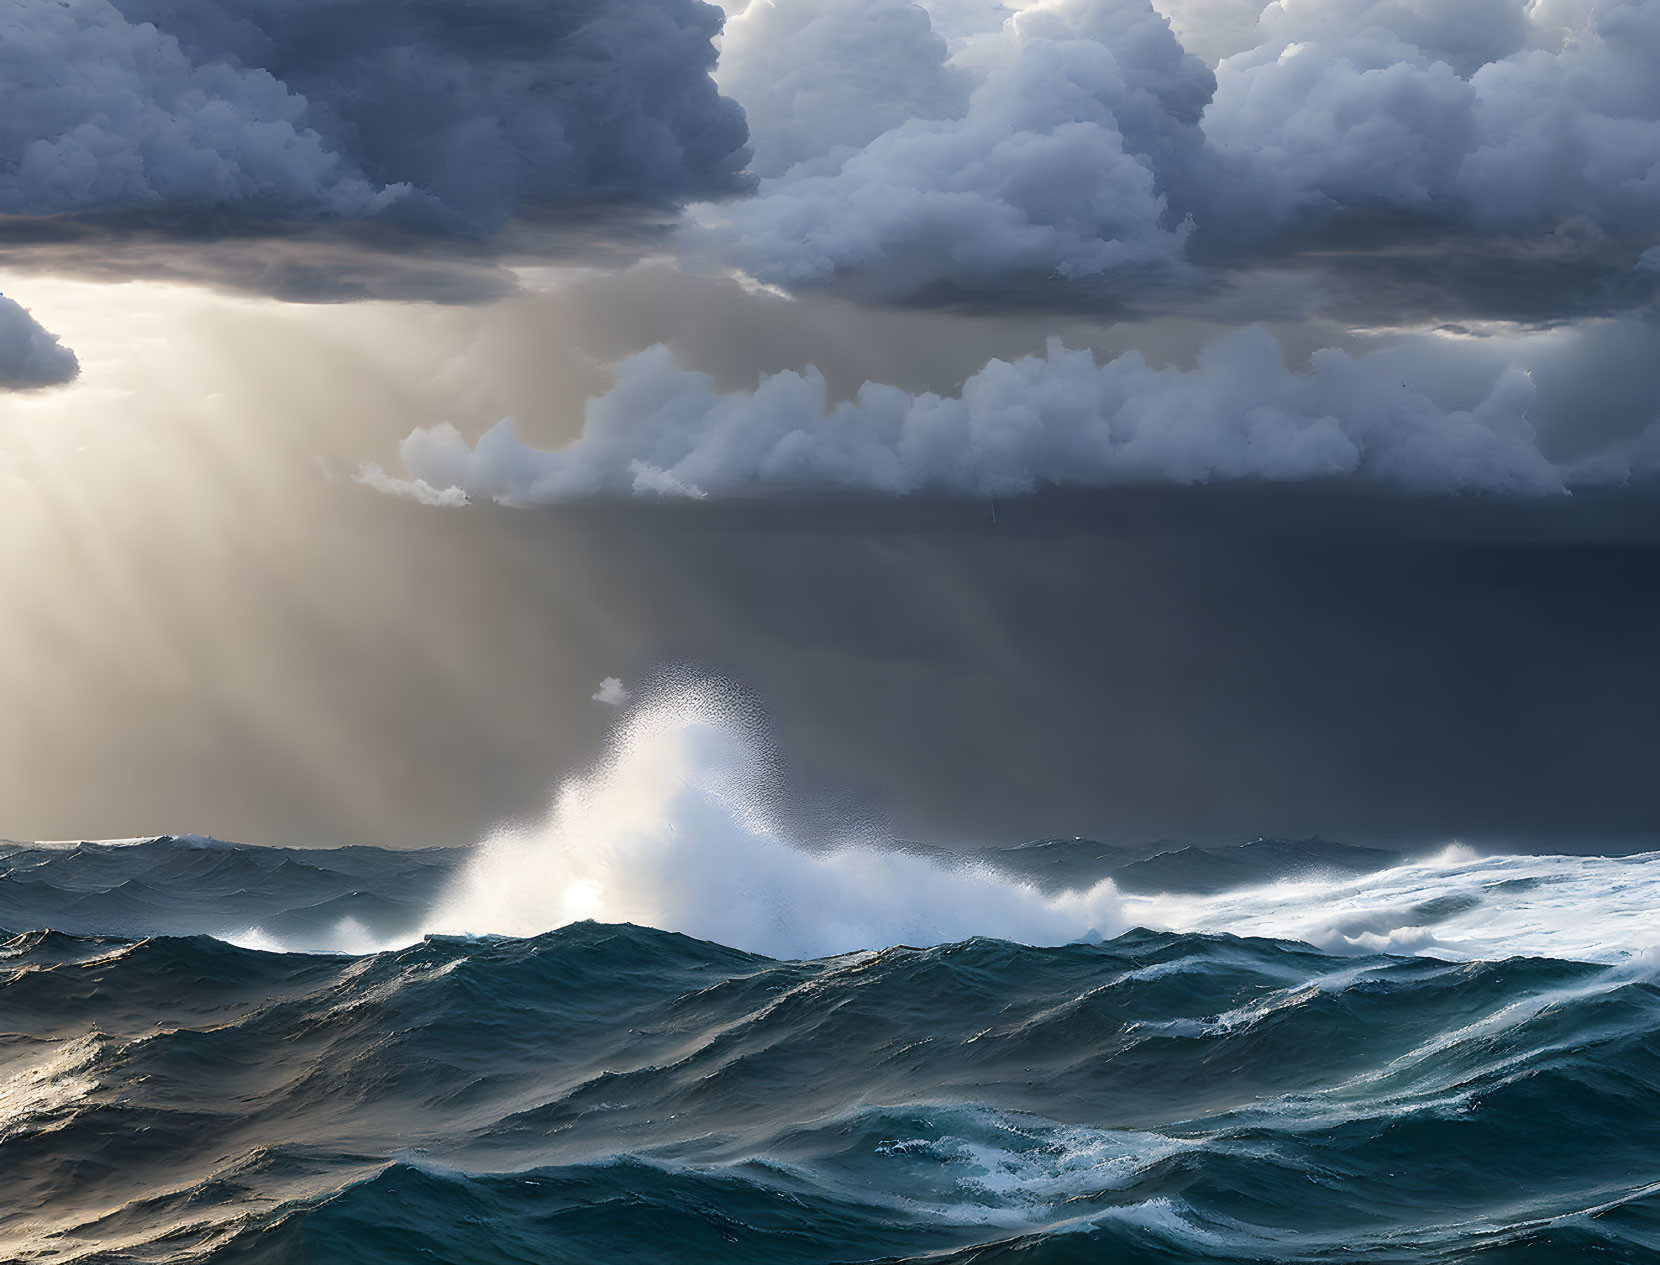 Stormy Seascape with Towering Waves and Sunlight Breaking Through Clouds